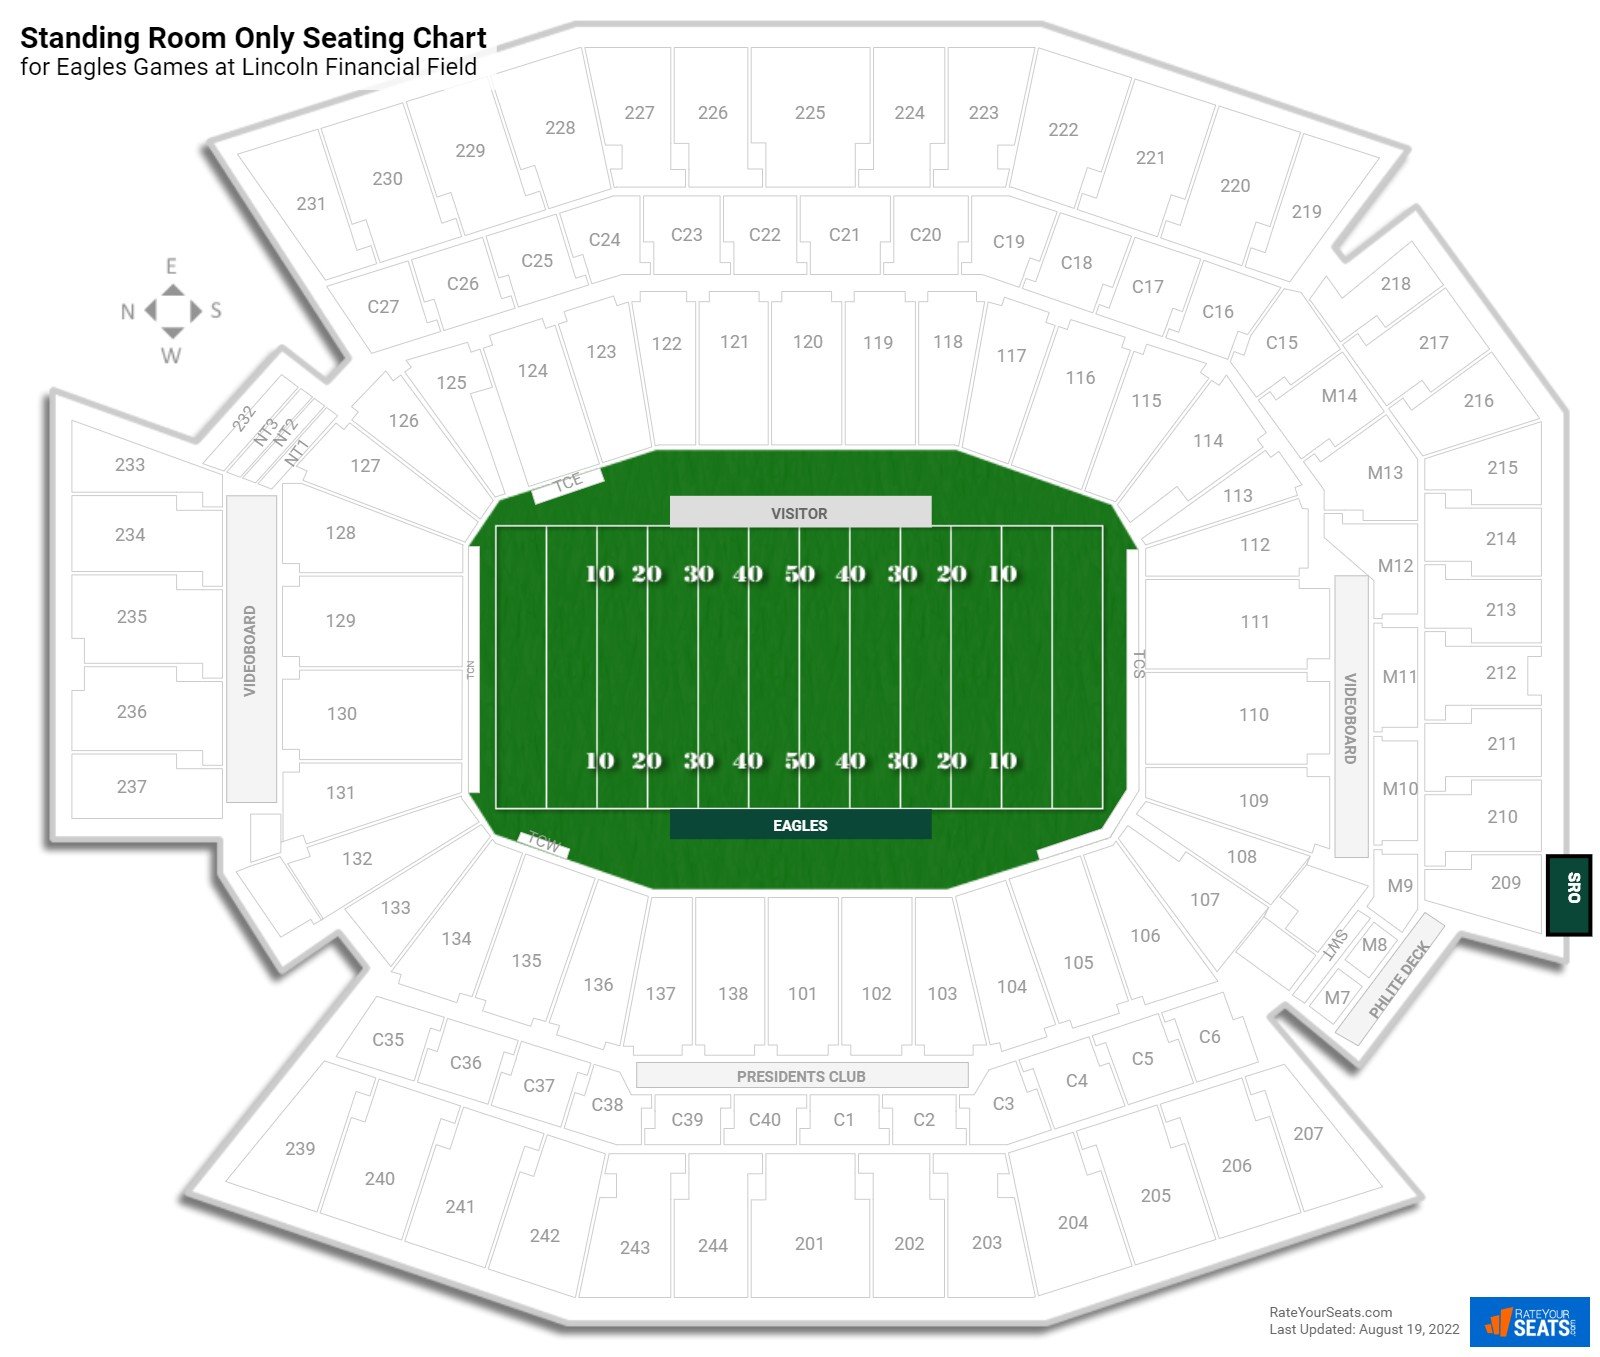 Standing Room Only Tickets at Lincoln Financial Field 